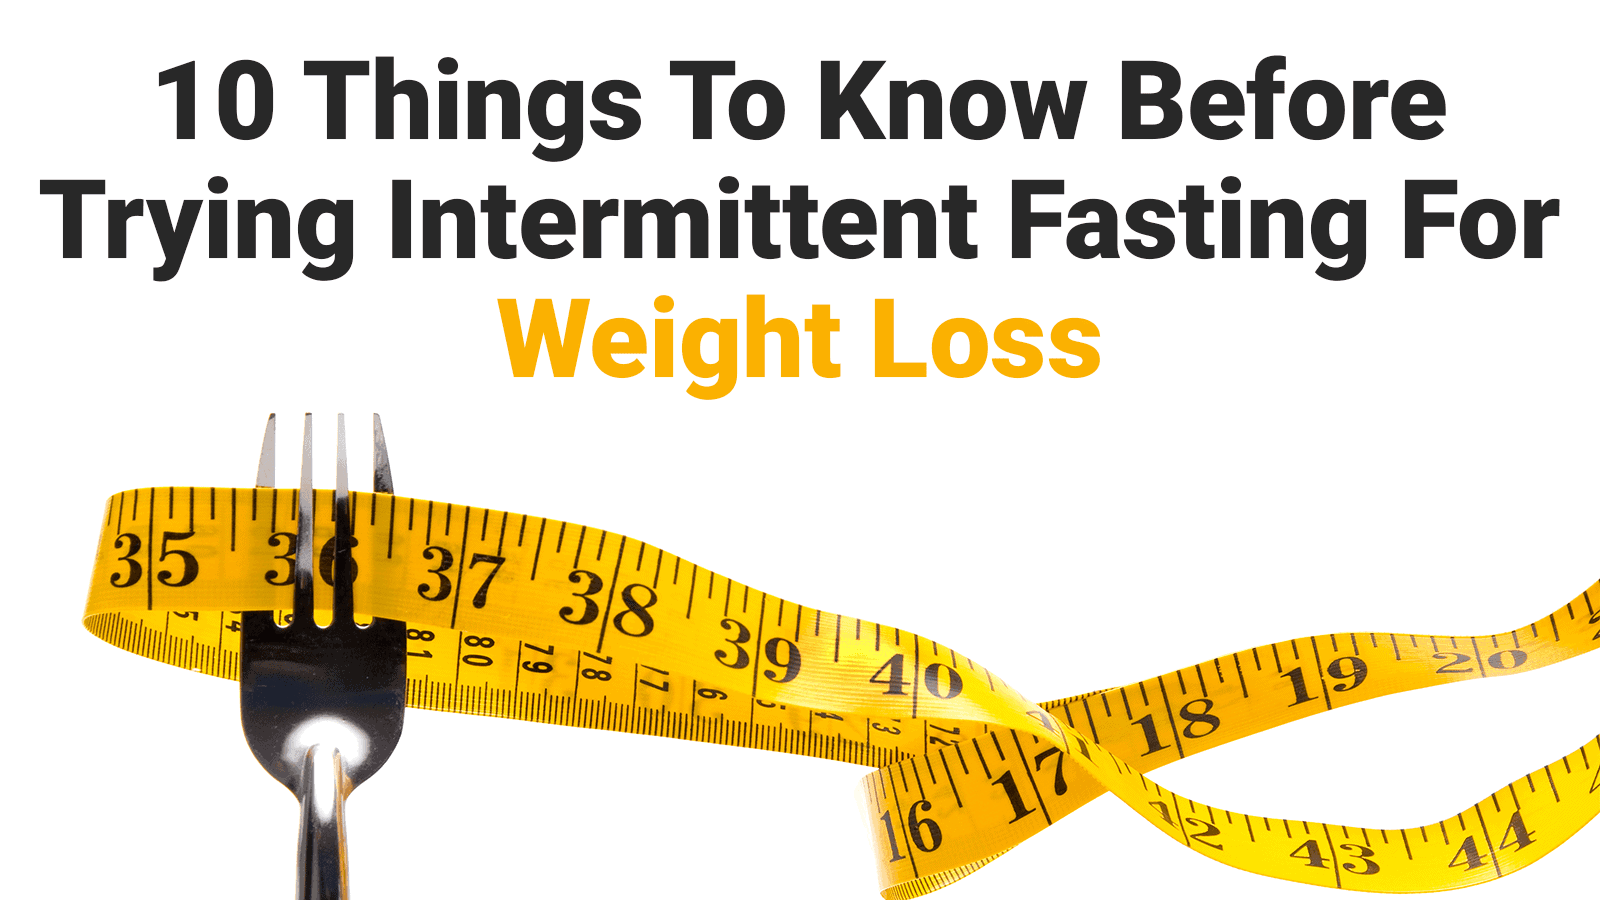 10 Things To Know Before Trying Intermittent Fasting For Weight Loss